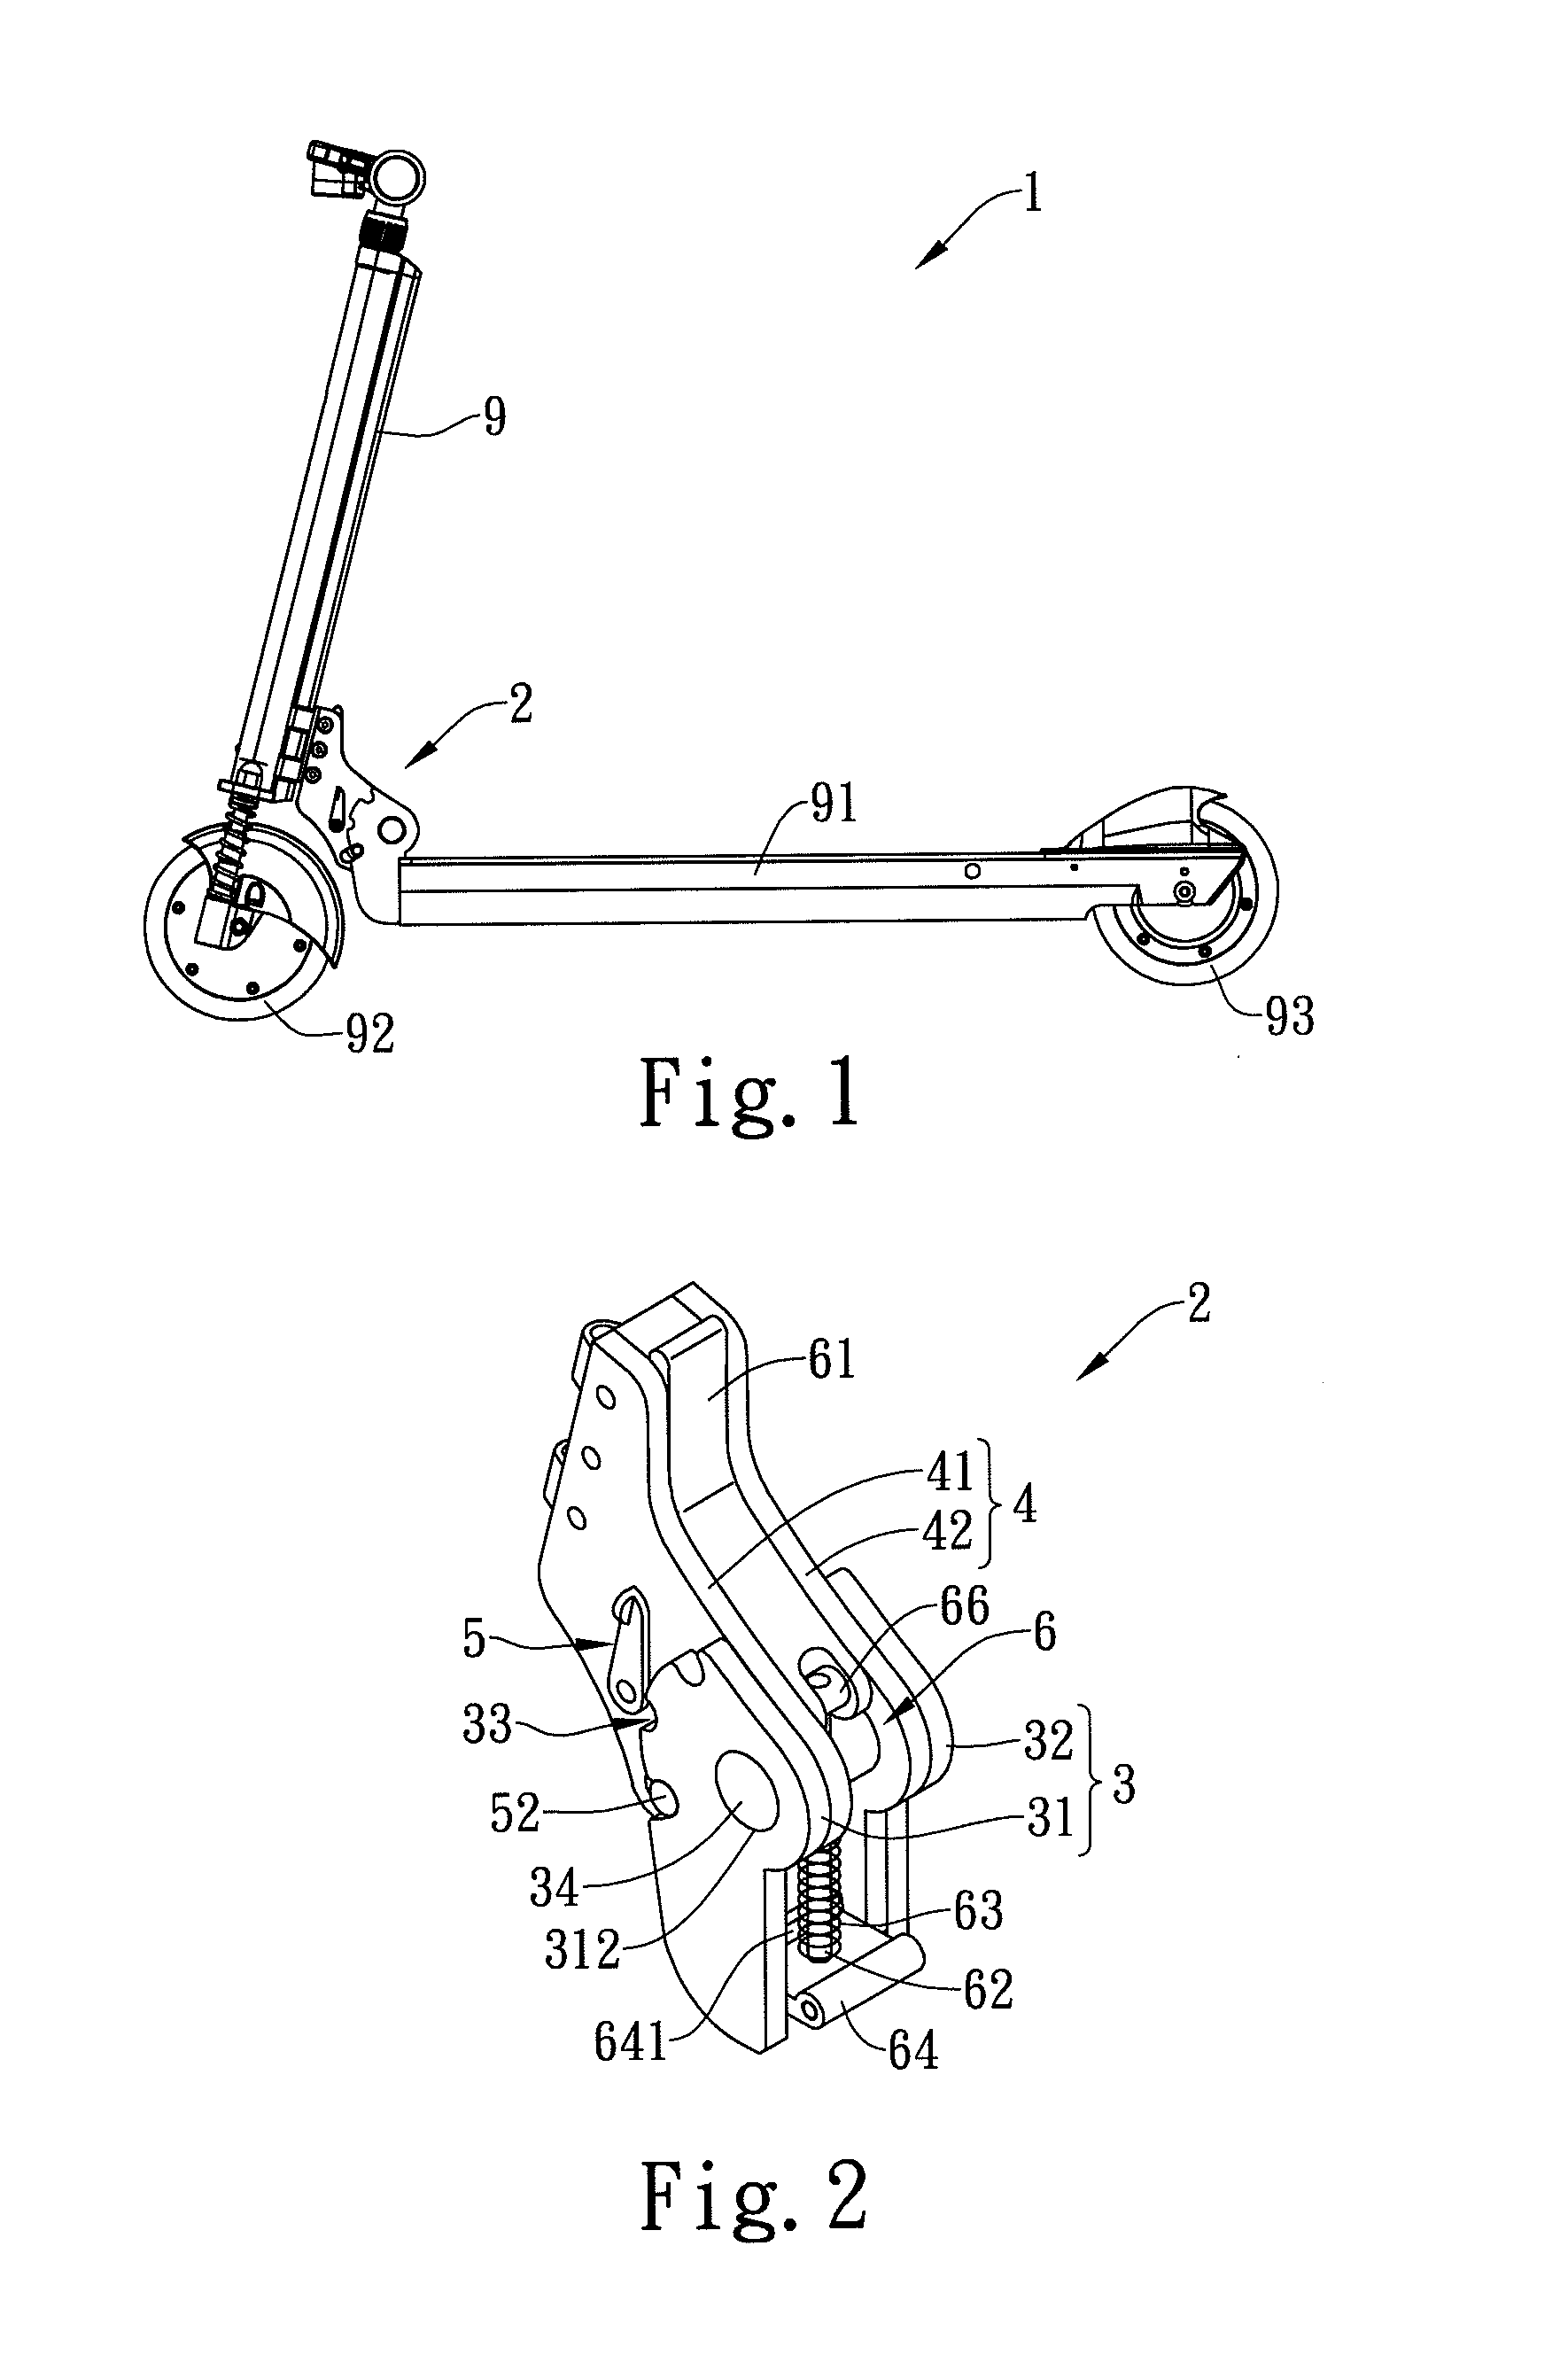 Integrated wheel and electric scooter using the wheel